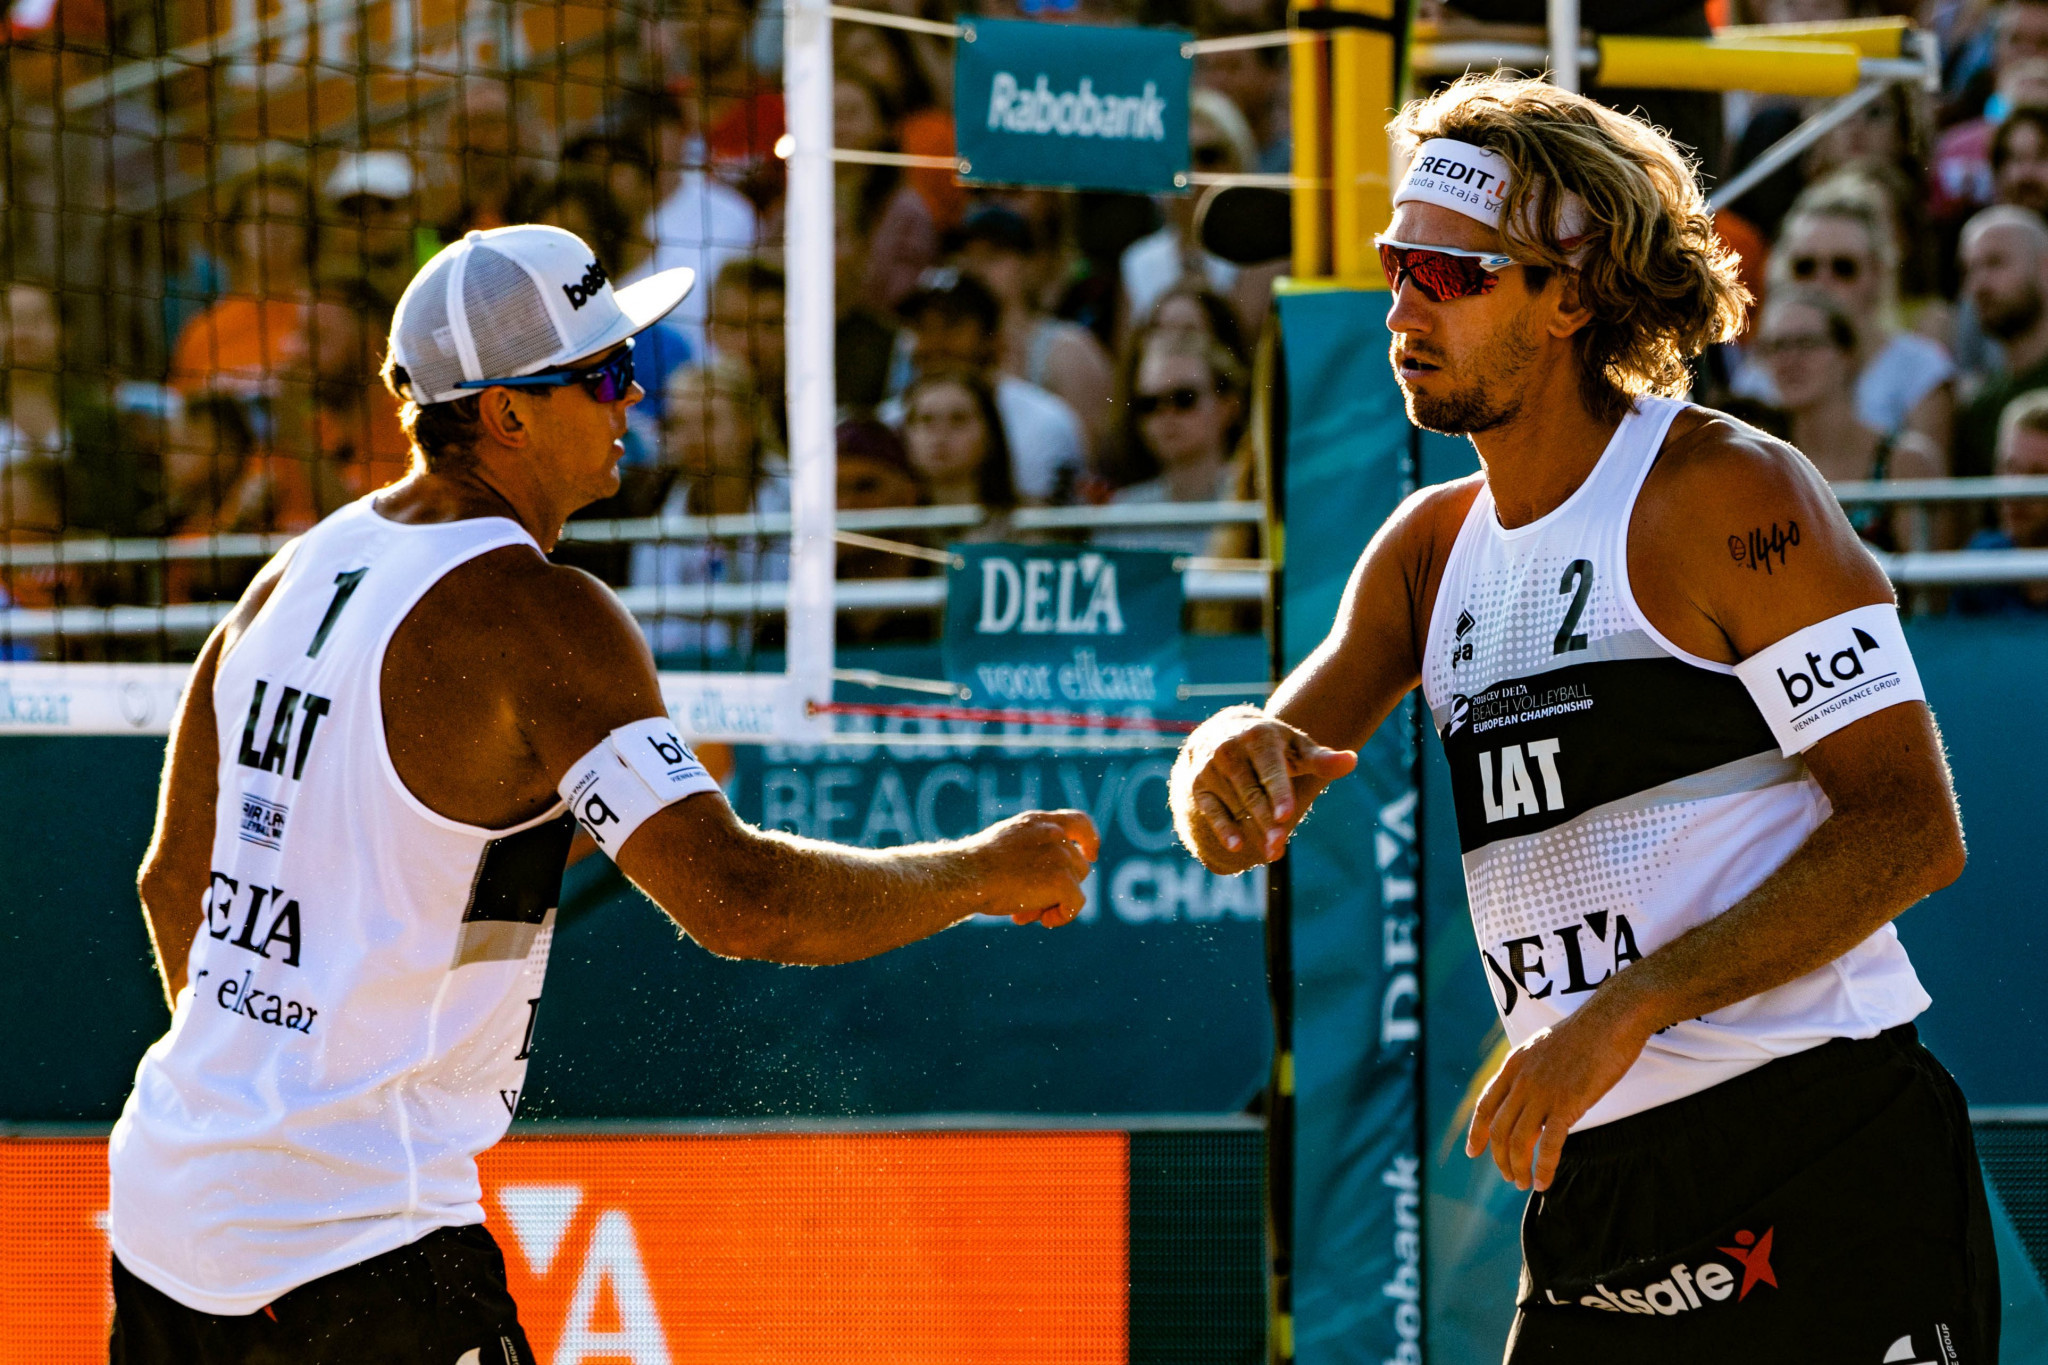 Latvians Samoilovs and Smedins defeated on day of surprises at FIVB Beach World Tour